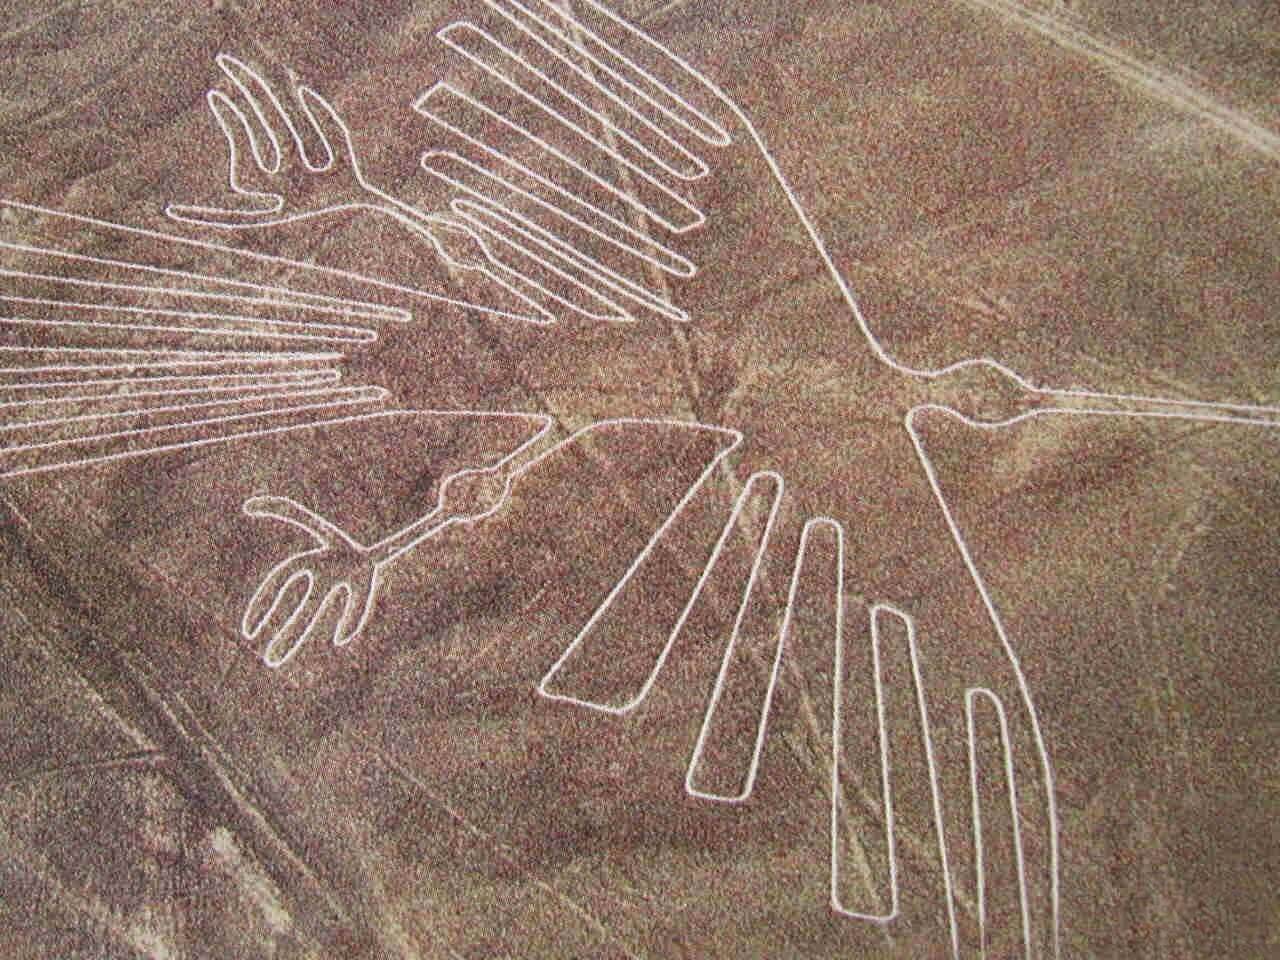 Ancient peoples drew on the Earth drawings, visible only from a great height